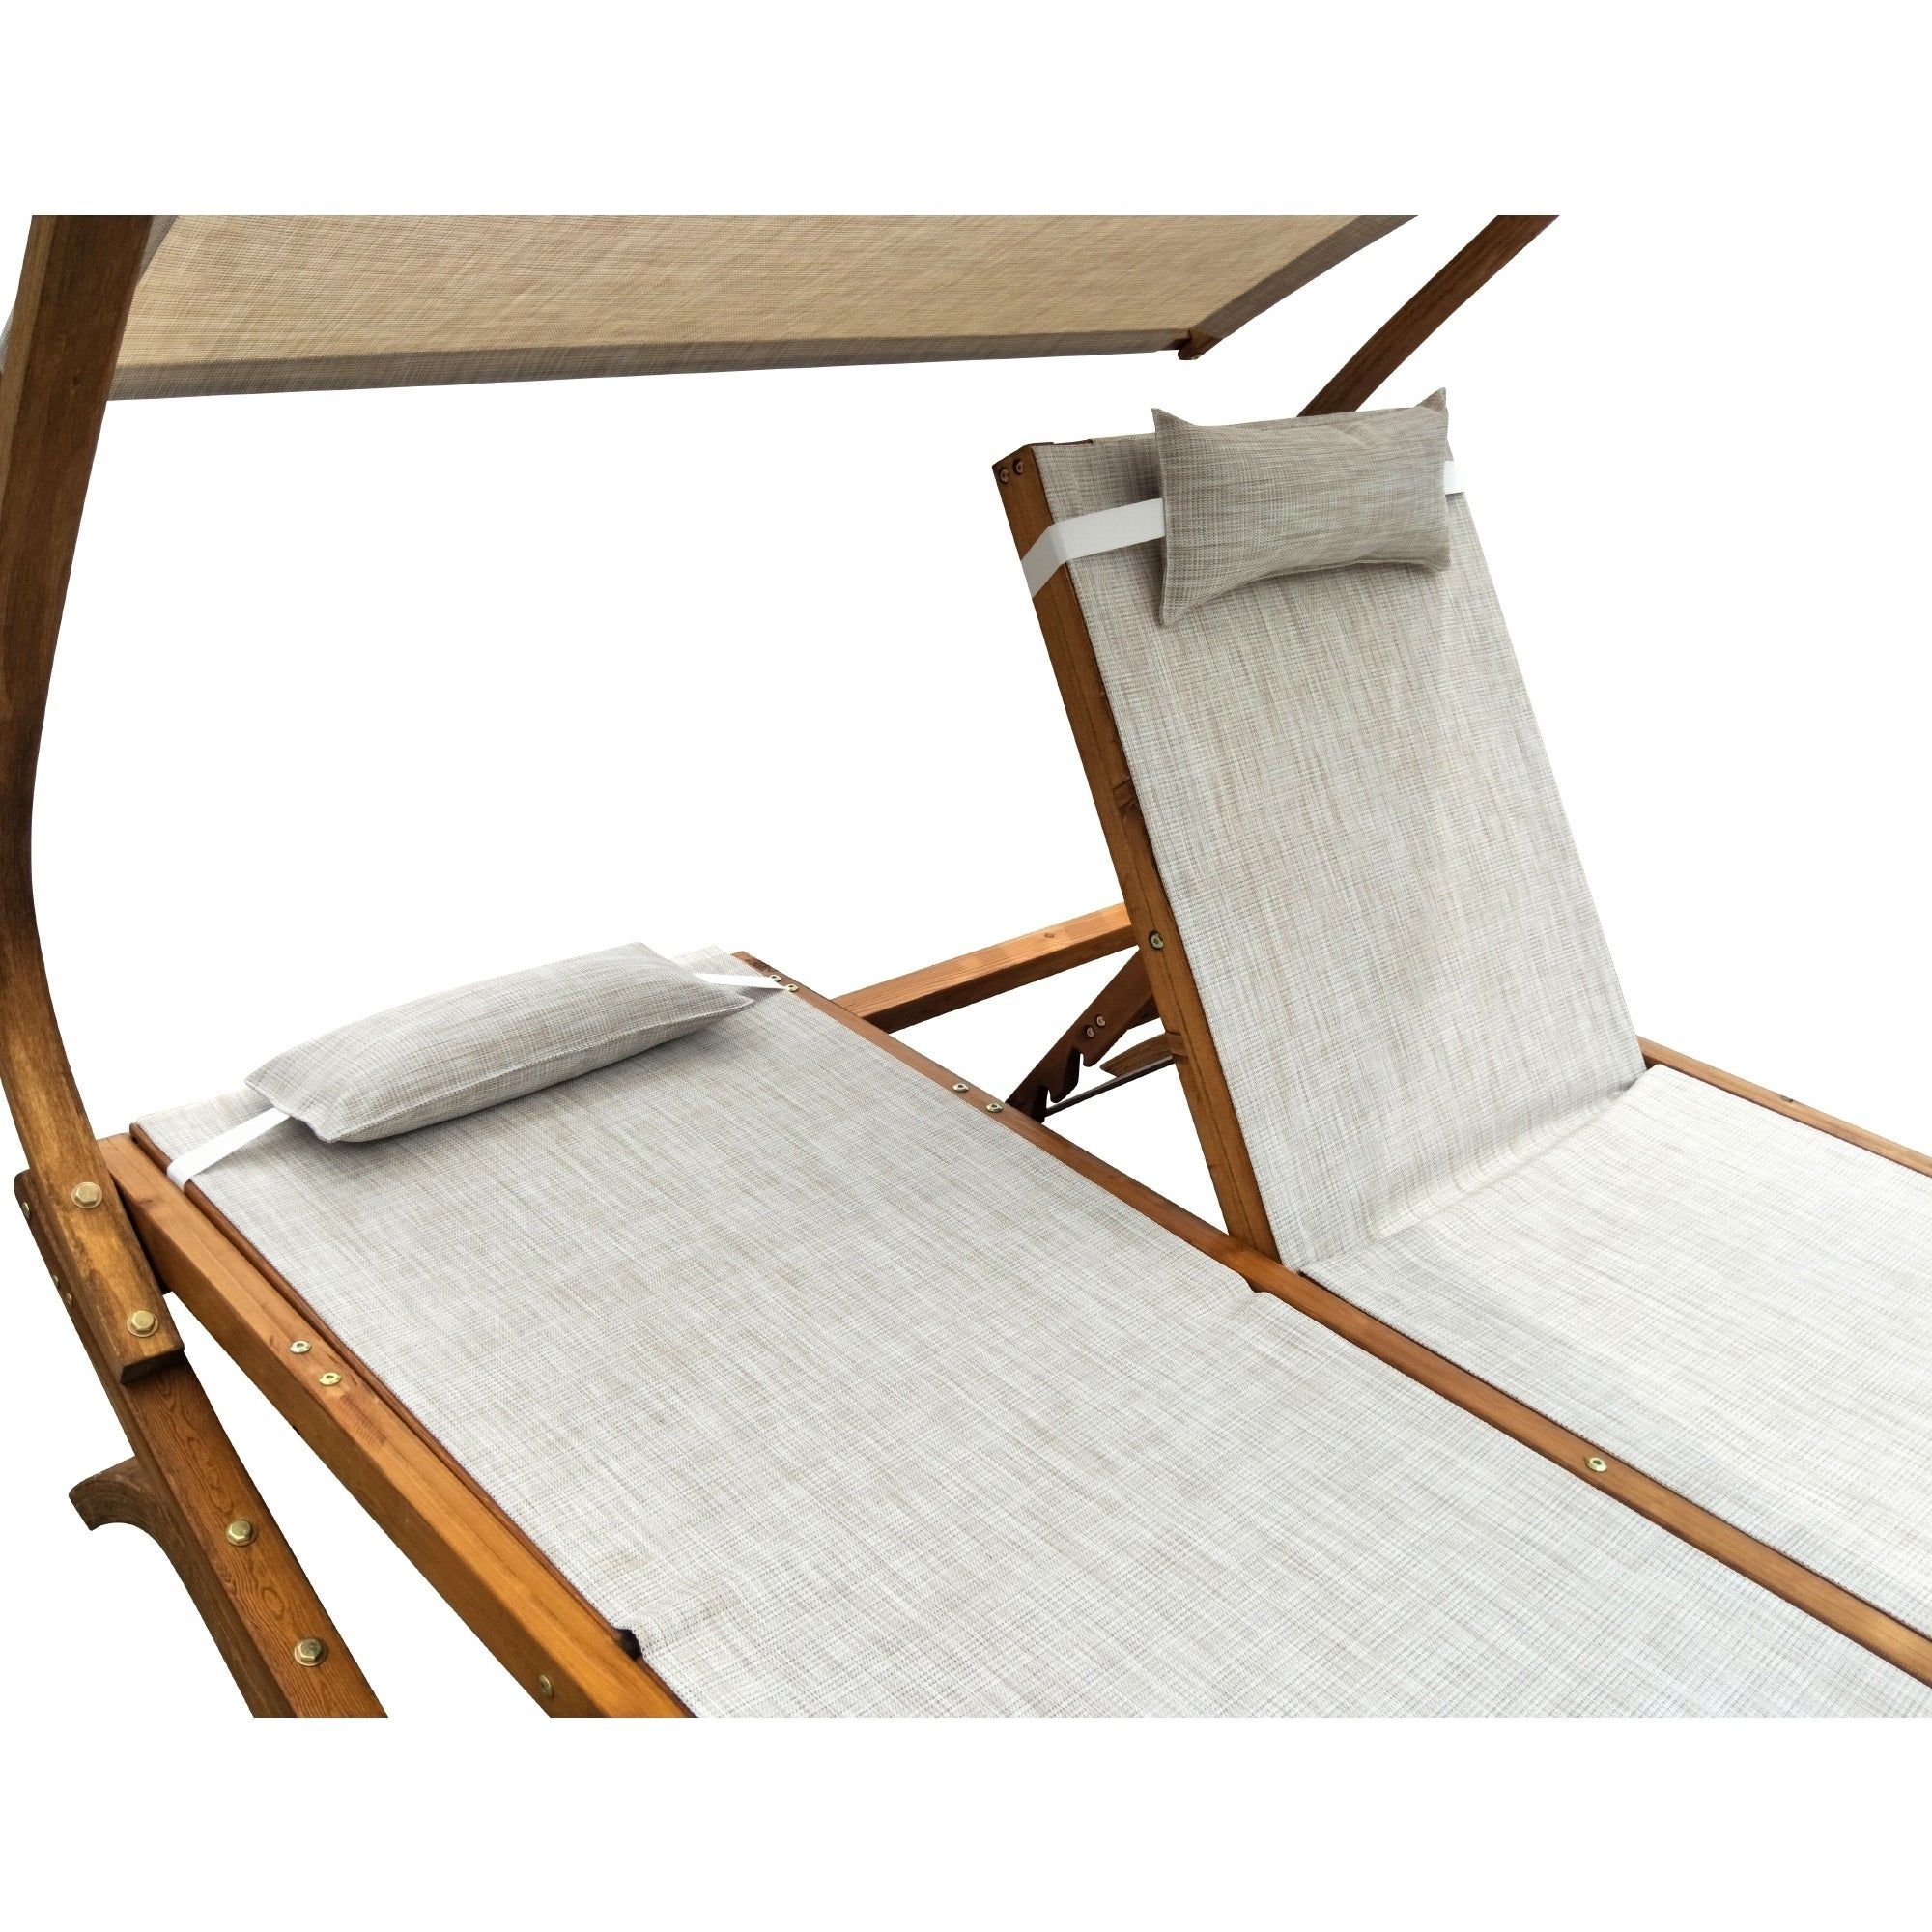 Most Current Double Reclining Lounge Chair With Canopy Inside Double Reclining Lounge Chairs With Canopy (View 2 of 25)